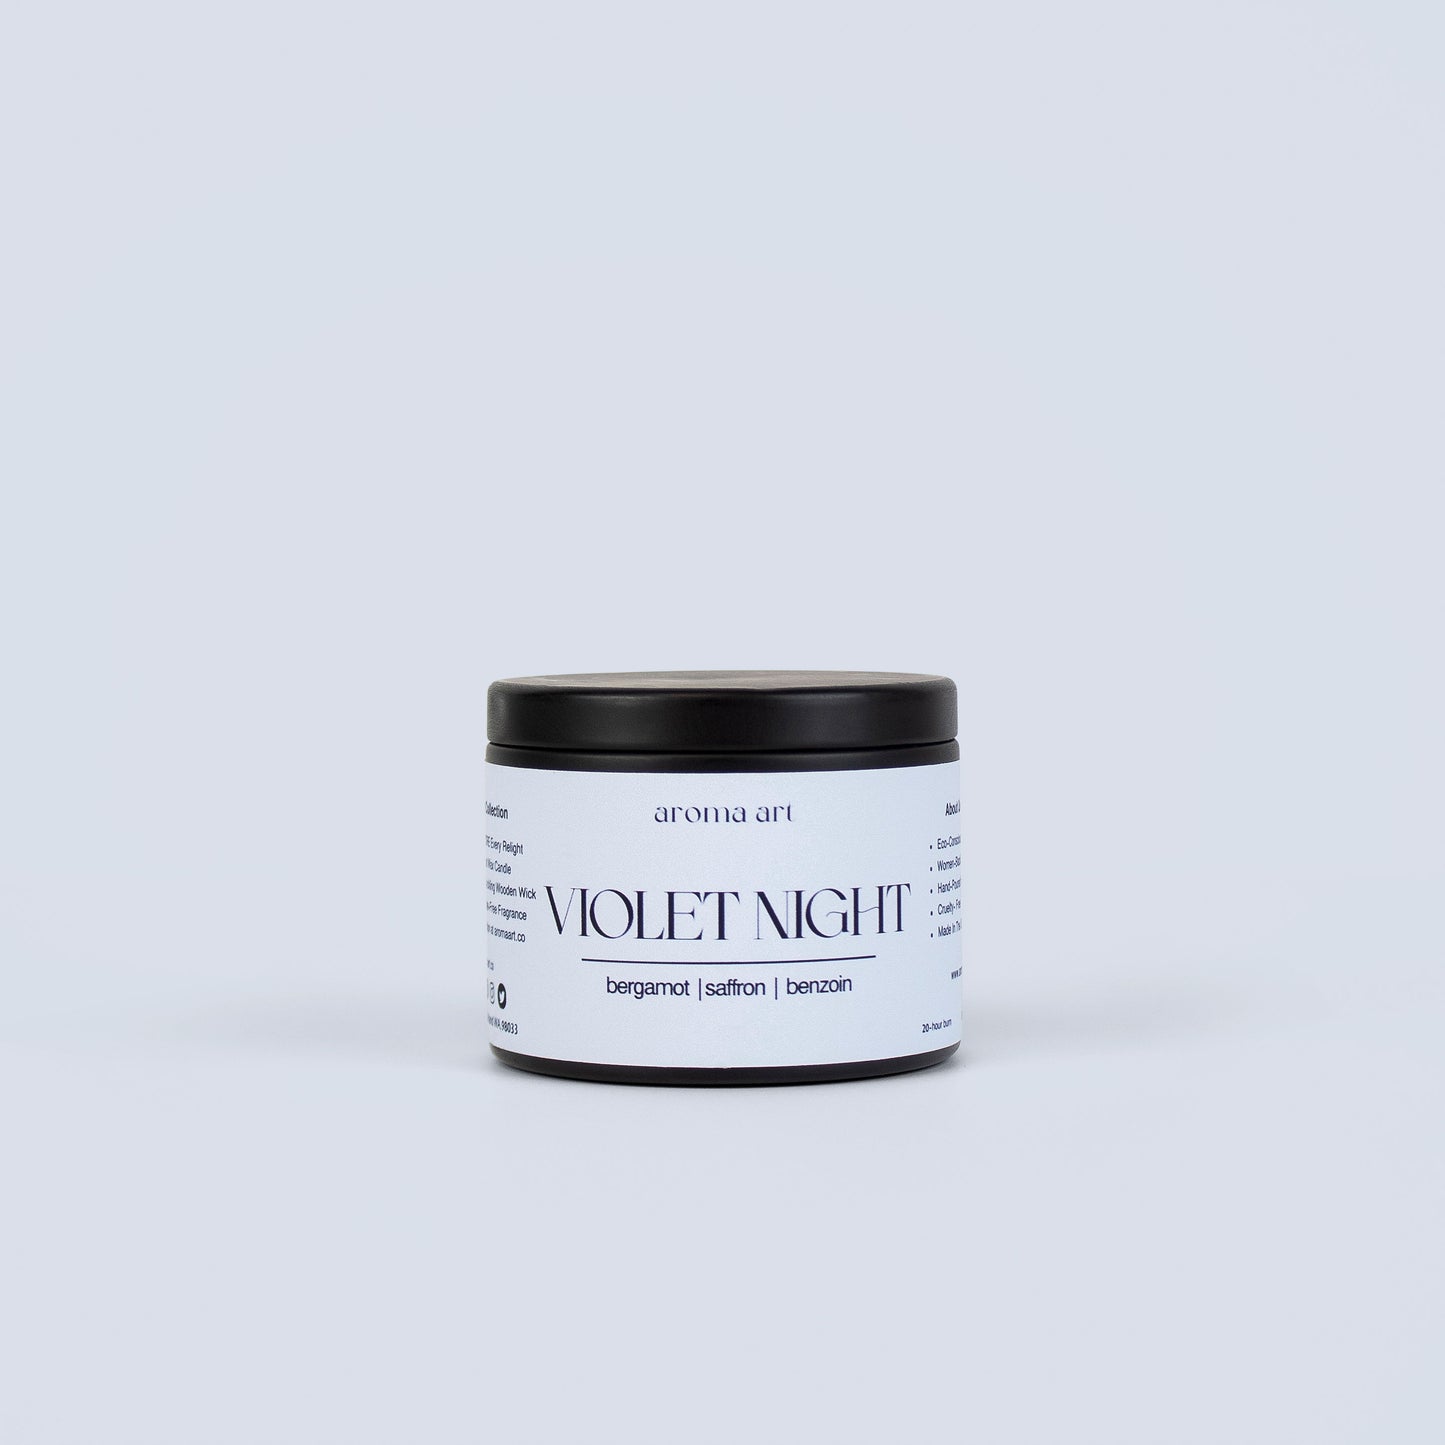 A 3.5oz travel sized tin crackling wooden wick candle named Violet Night with notes of bergamot, saffron, and benzoin. A sensual scent evoking the inspirational vibes of an evening at the jazz lounge. Perfect for a night of self-care or a romantic evening